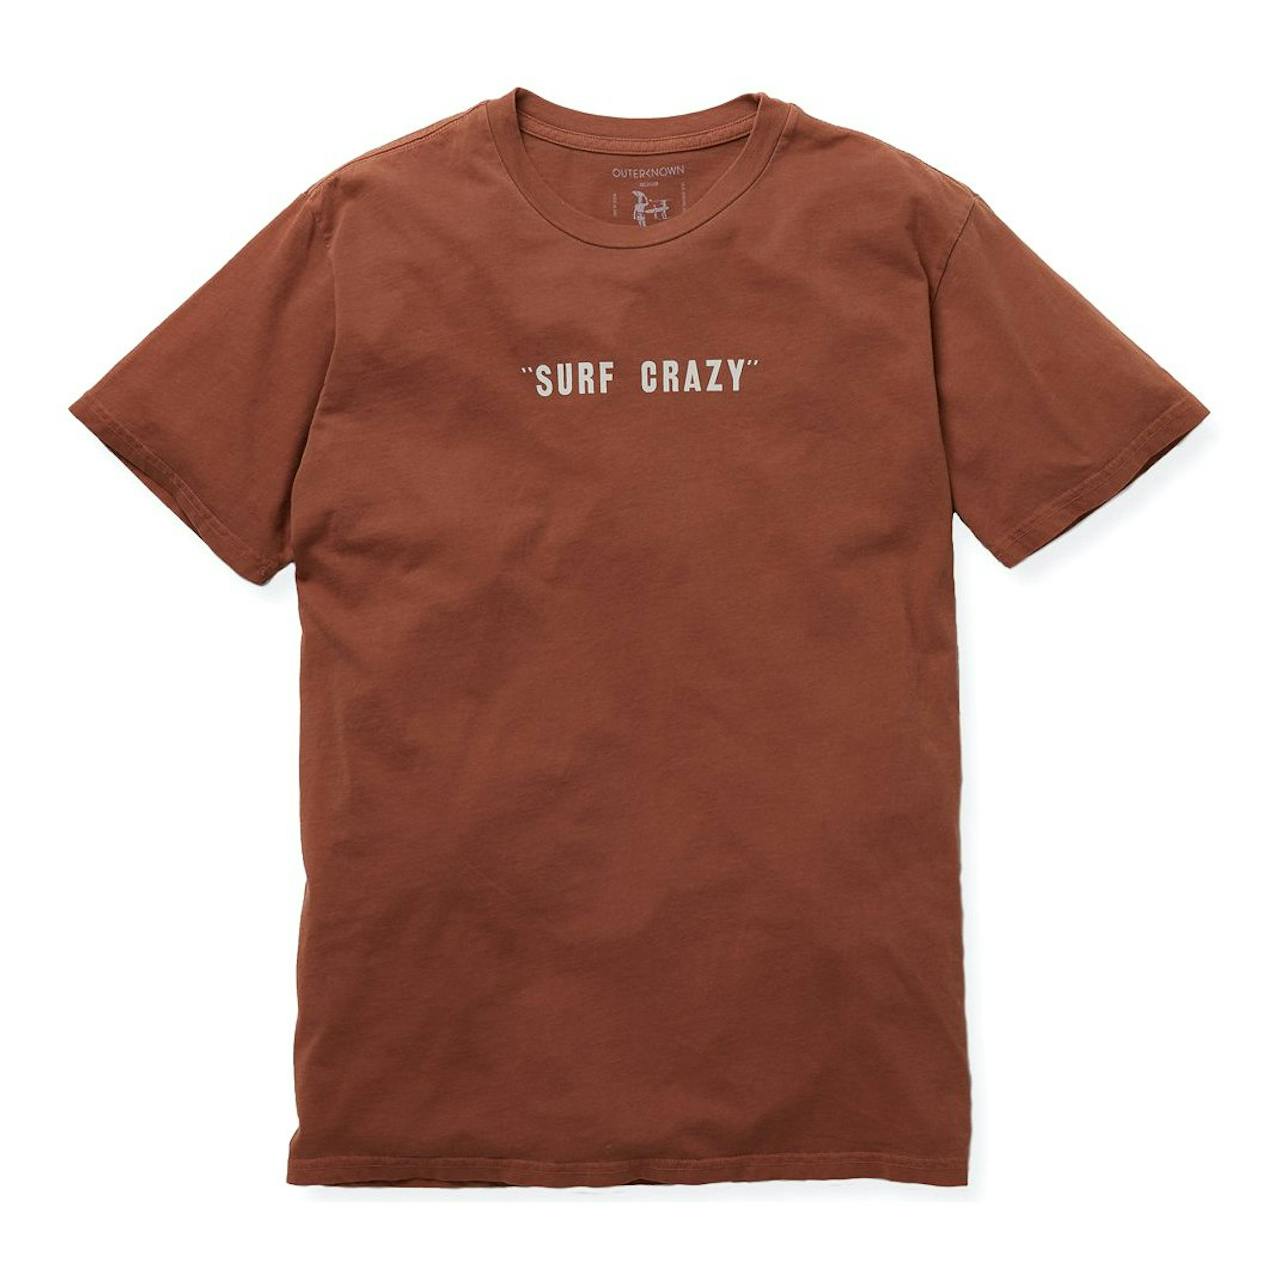 Outerknown Surf Crazy Tee